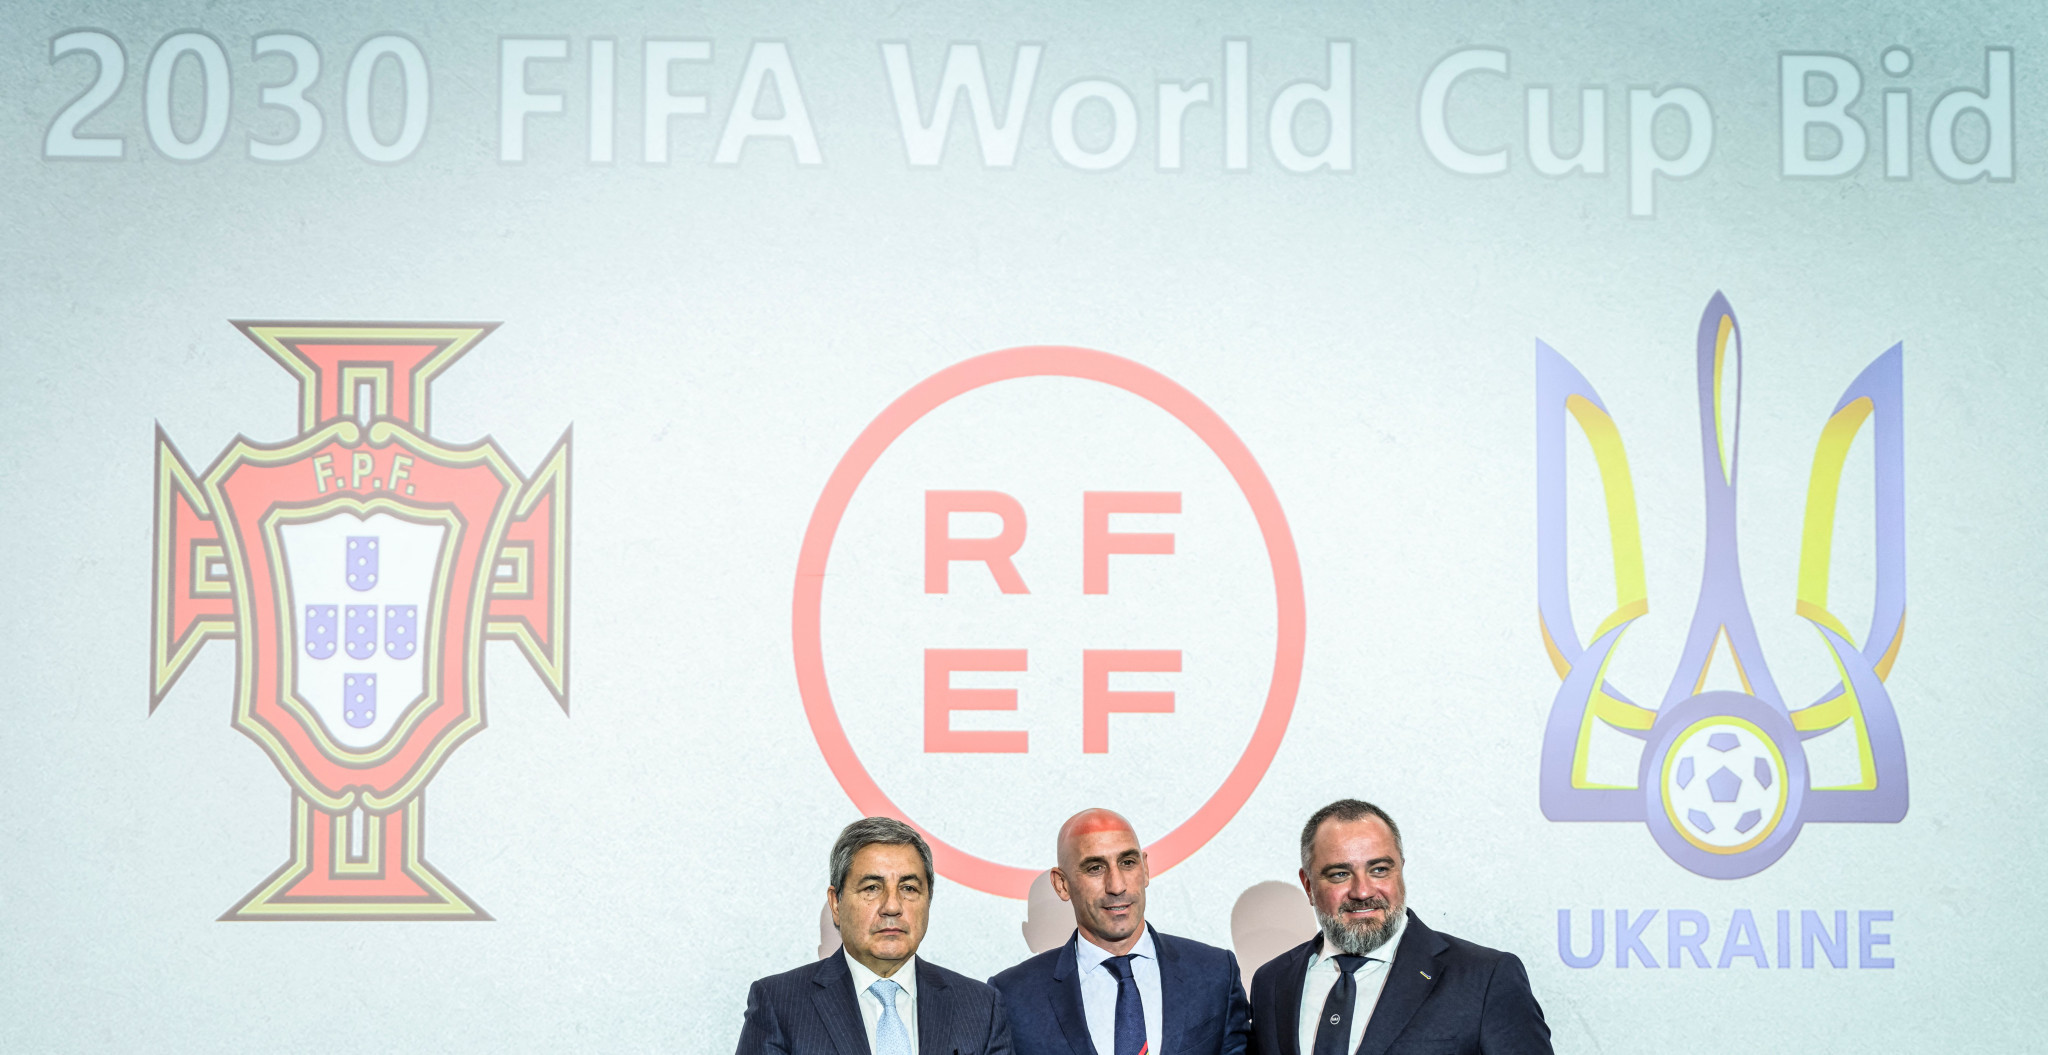 Spain and Portugal add Ukraine to bid for 2030 FIFA World Cup